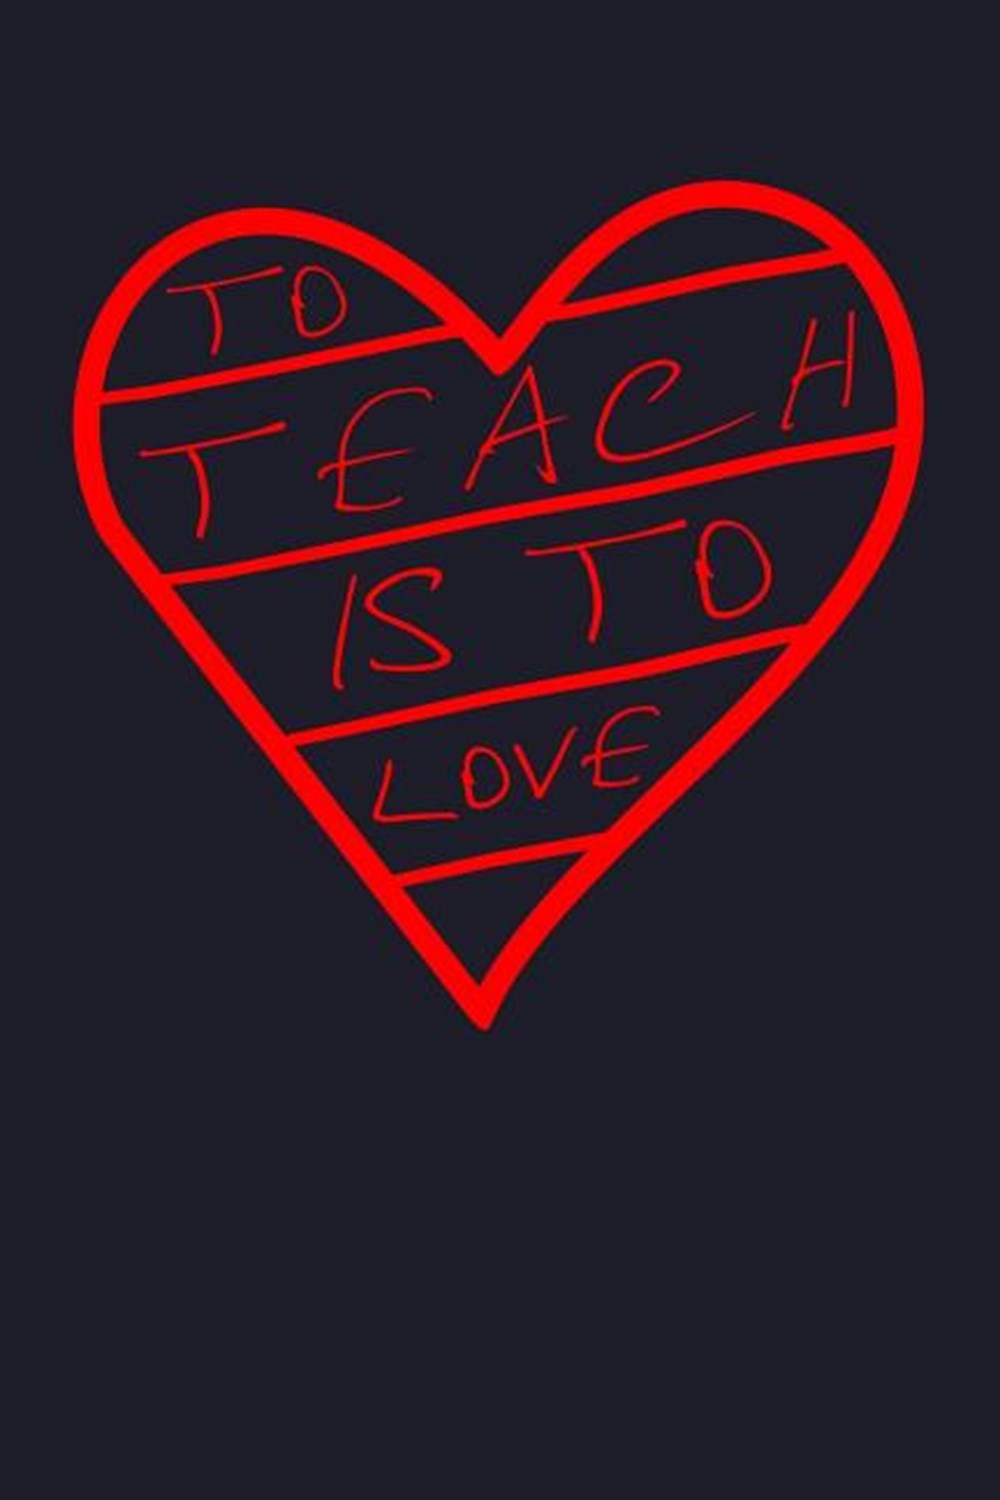 To Teach Is To Love Blank Paper Sketch Book - Artist Sketch Pad Journal for Sketching, Doodling, Dra